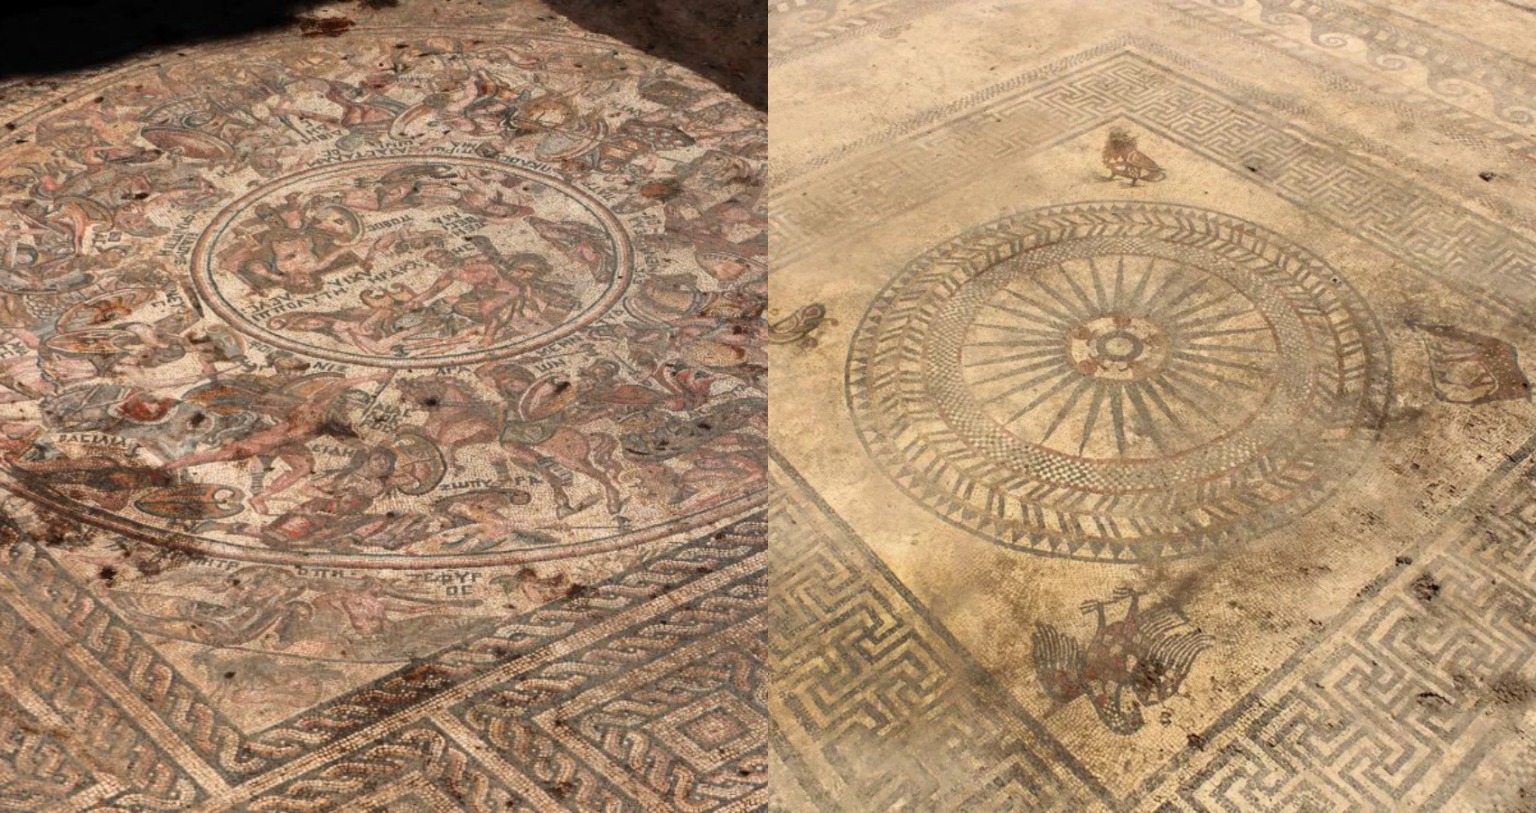 Elaborate Mosaics Unearthed in ‘Lost’ Roman City